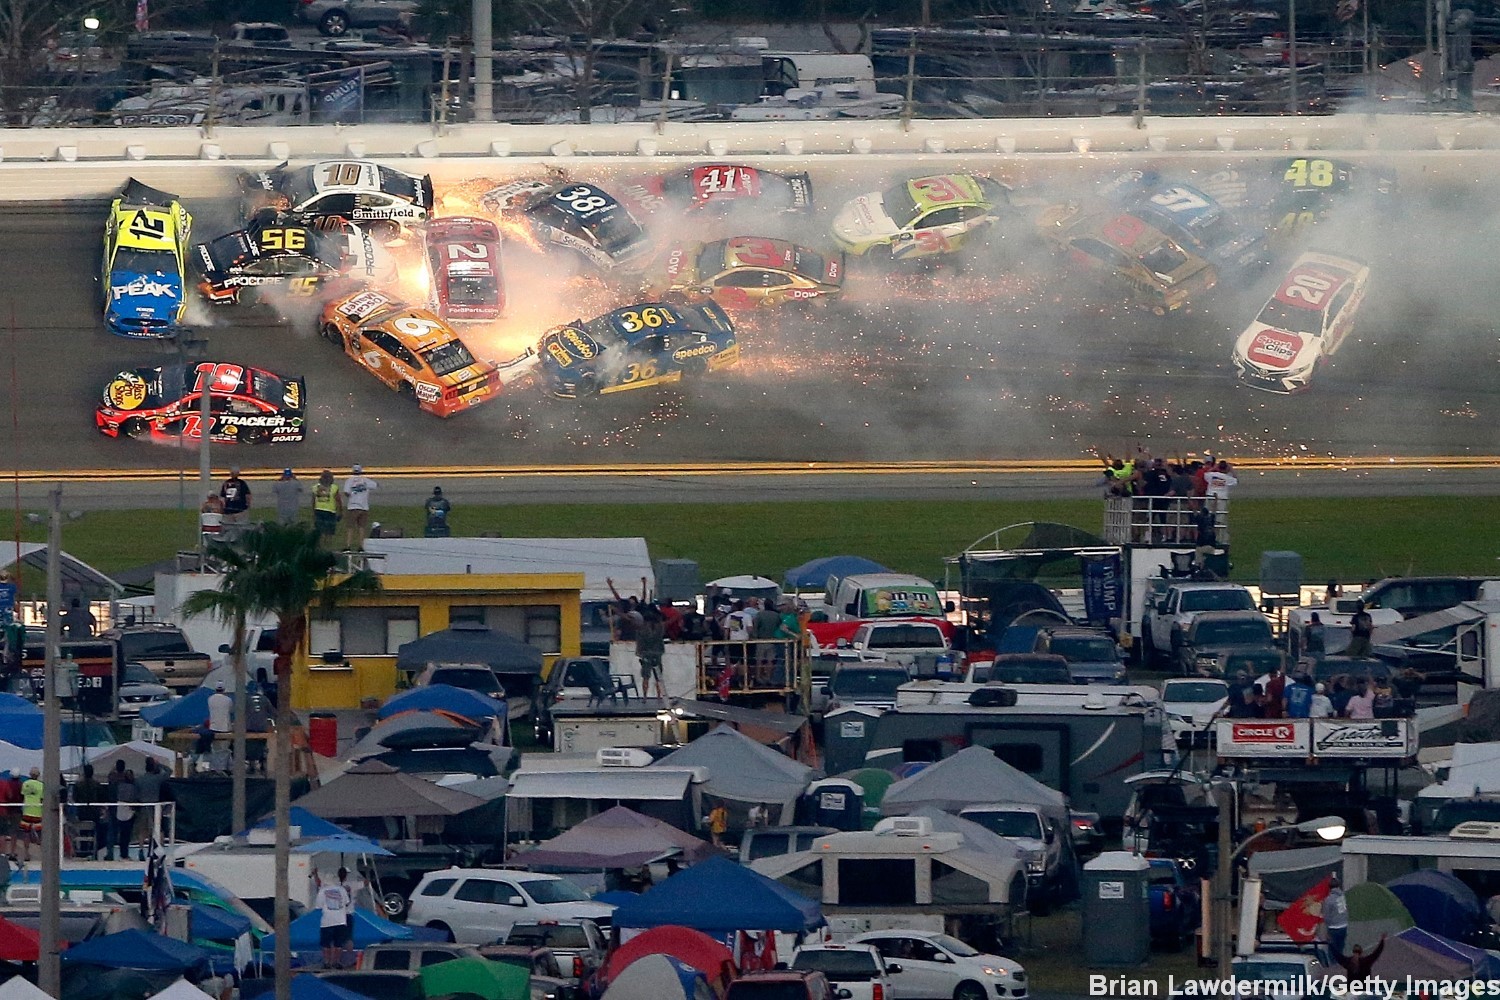 The Daytona 500 is always good for at least one 'Big One'